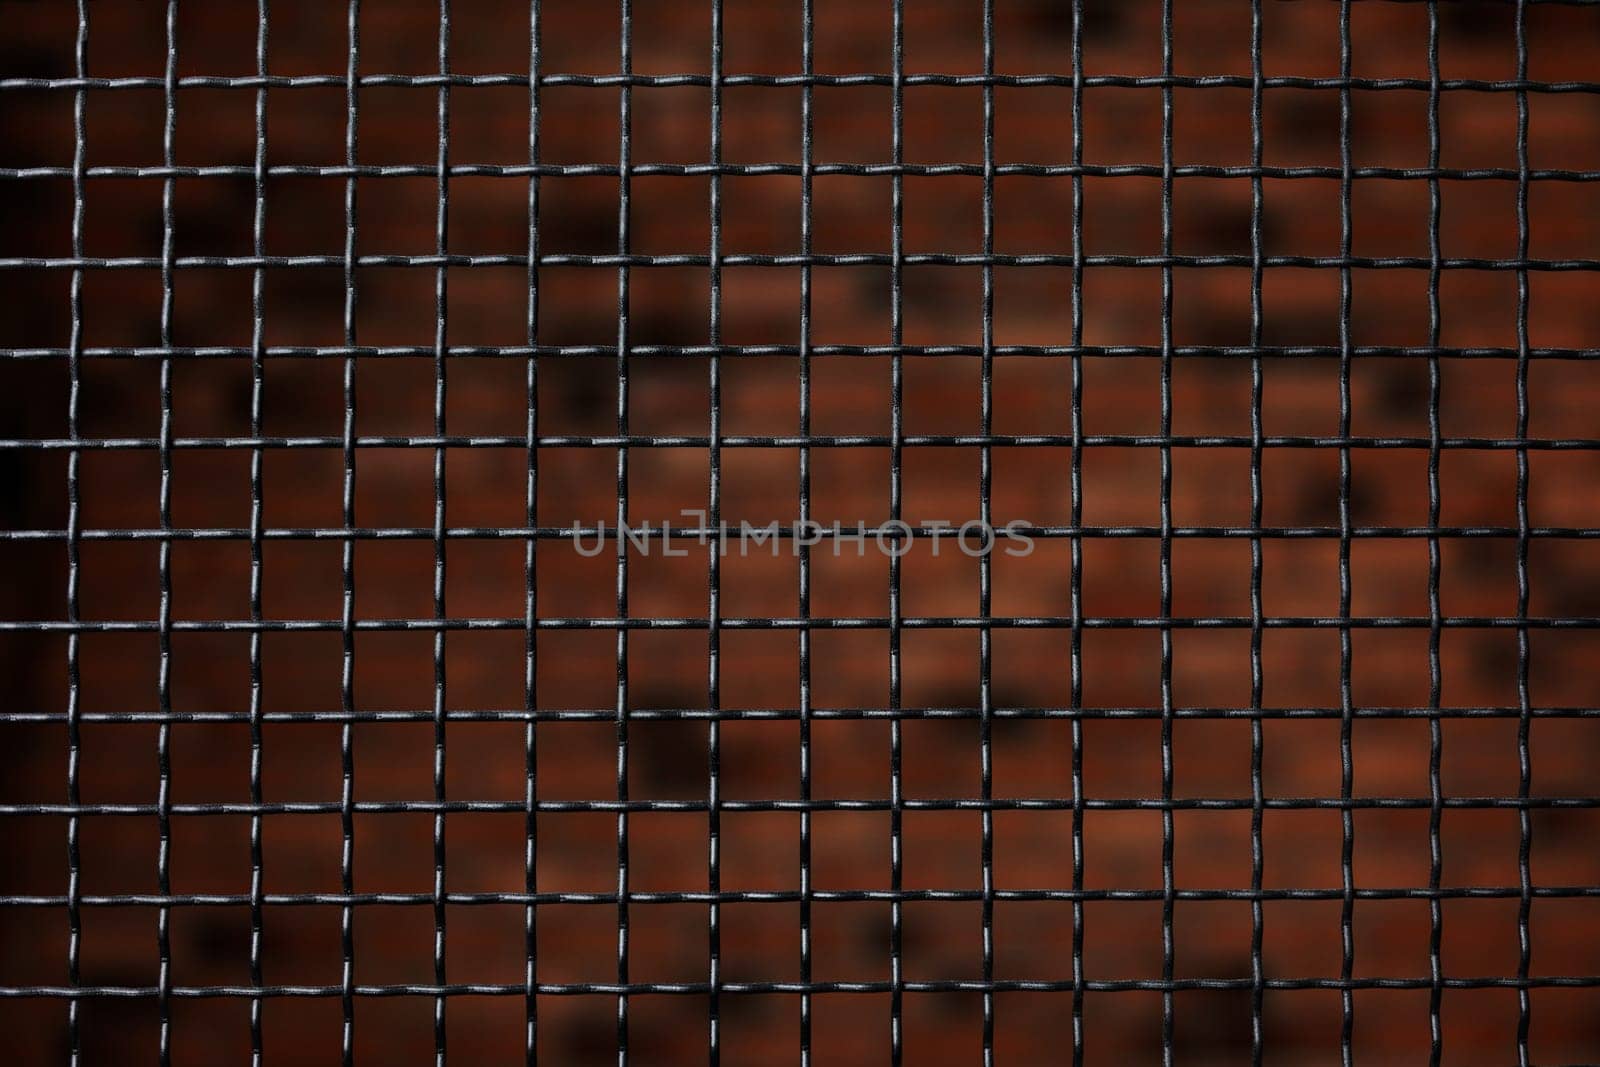 Black metal grating on natural brick background, steel fence indoors close up. Wallpaper metallic wire barrier. Stylized design solution in the interior. Security and safety concept.